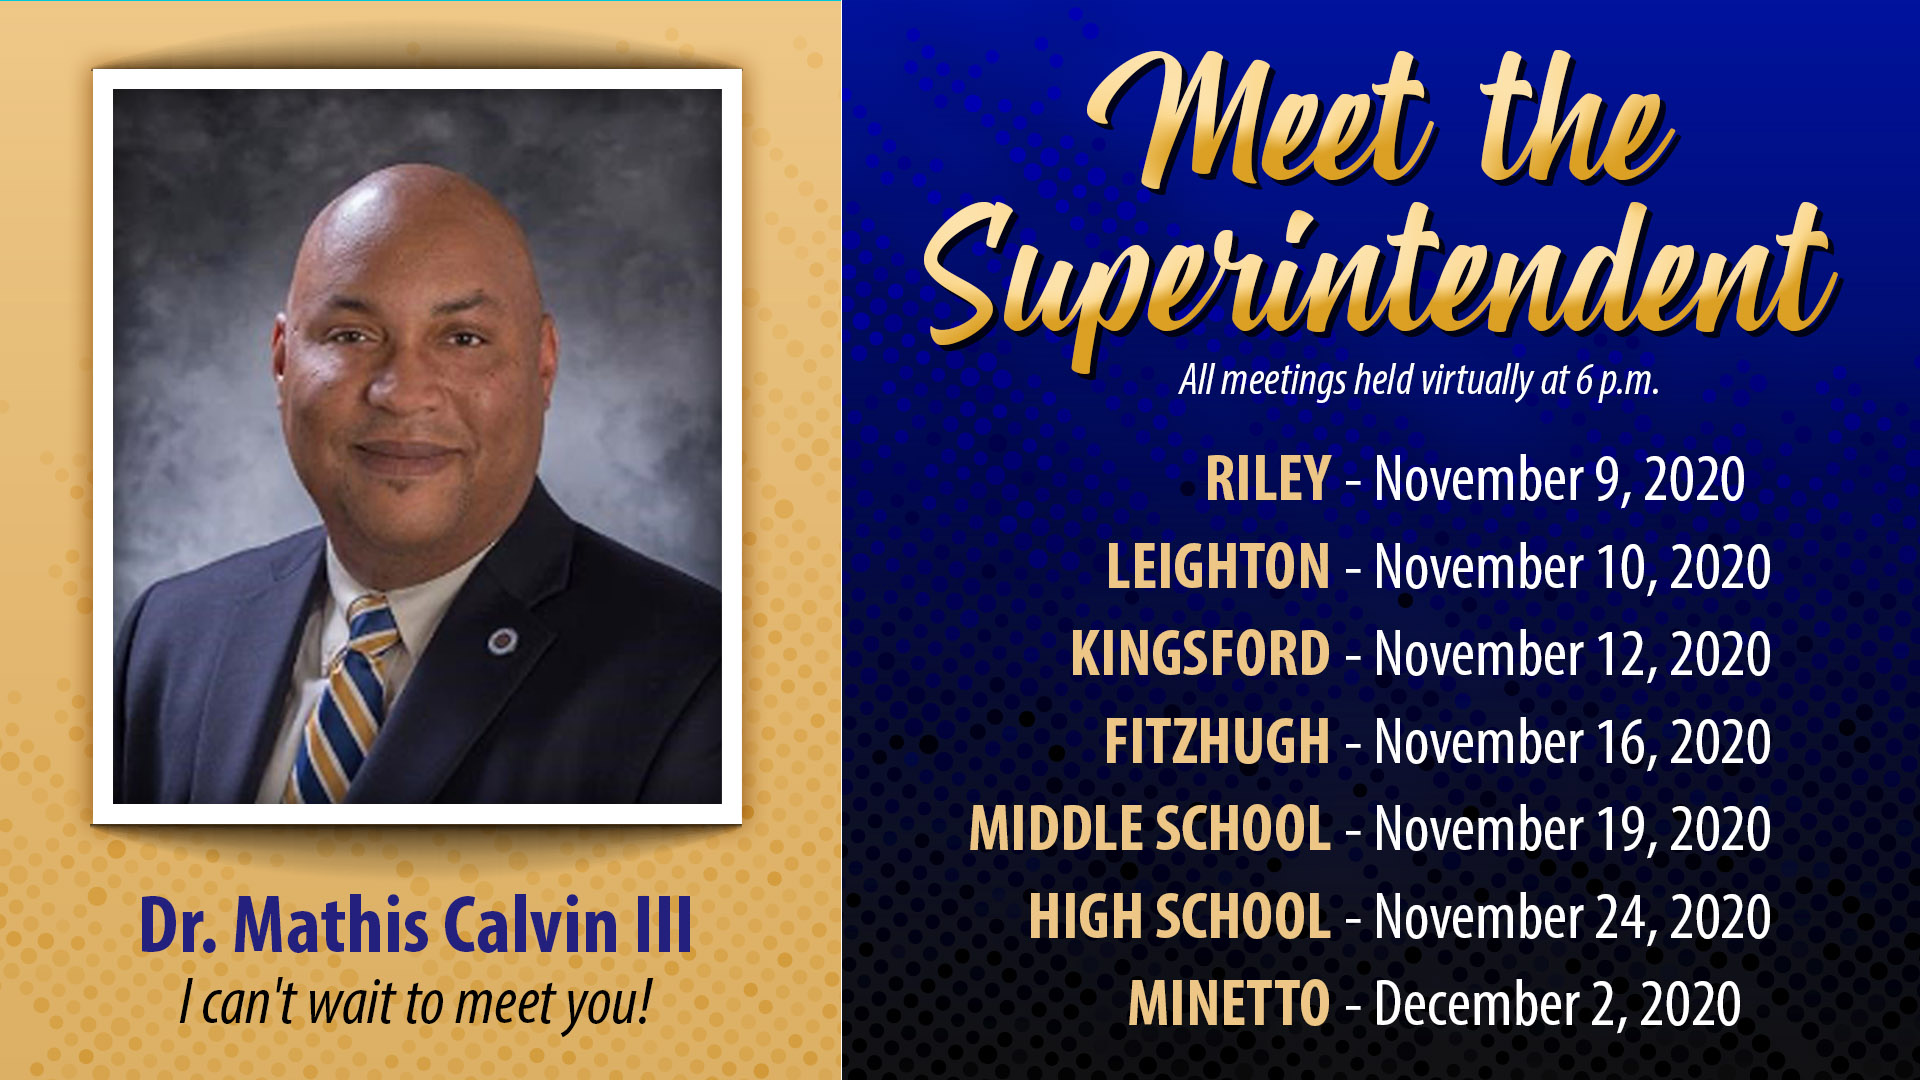 Picture of Dr. Mathis Calvin III with an invite to meet the Superintendent